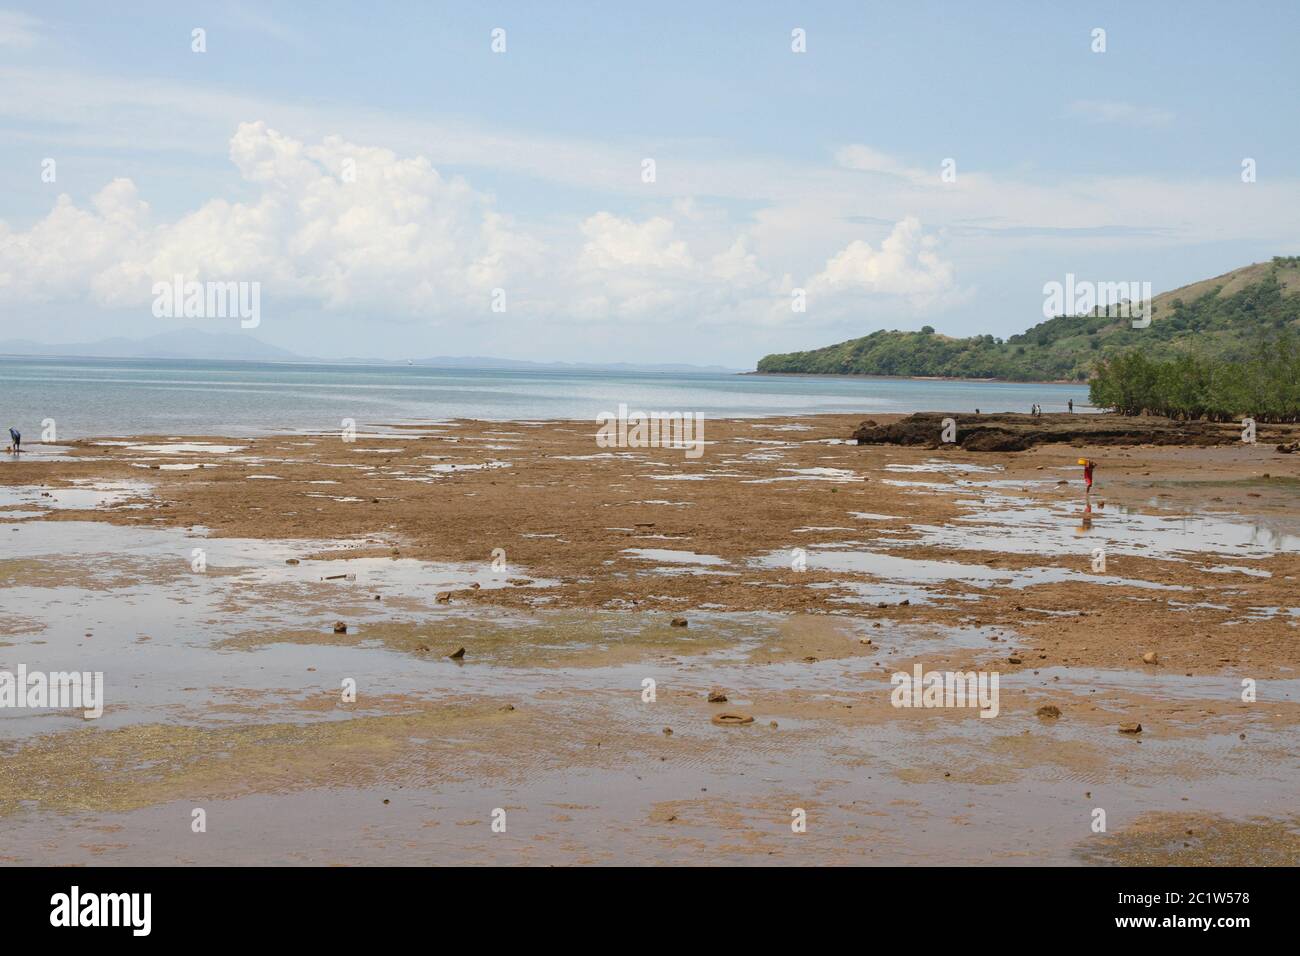 View of beach, Andoany or Hell-Ville harbour, Nosy Be, Madagascar. Stock Photo